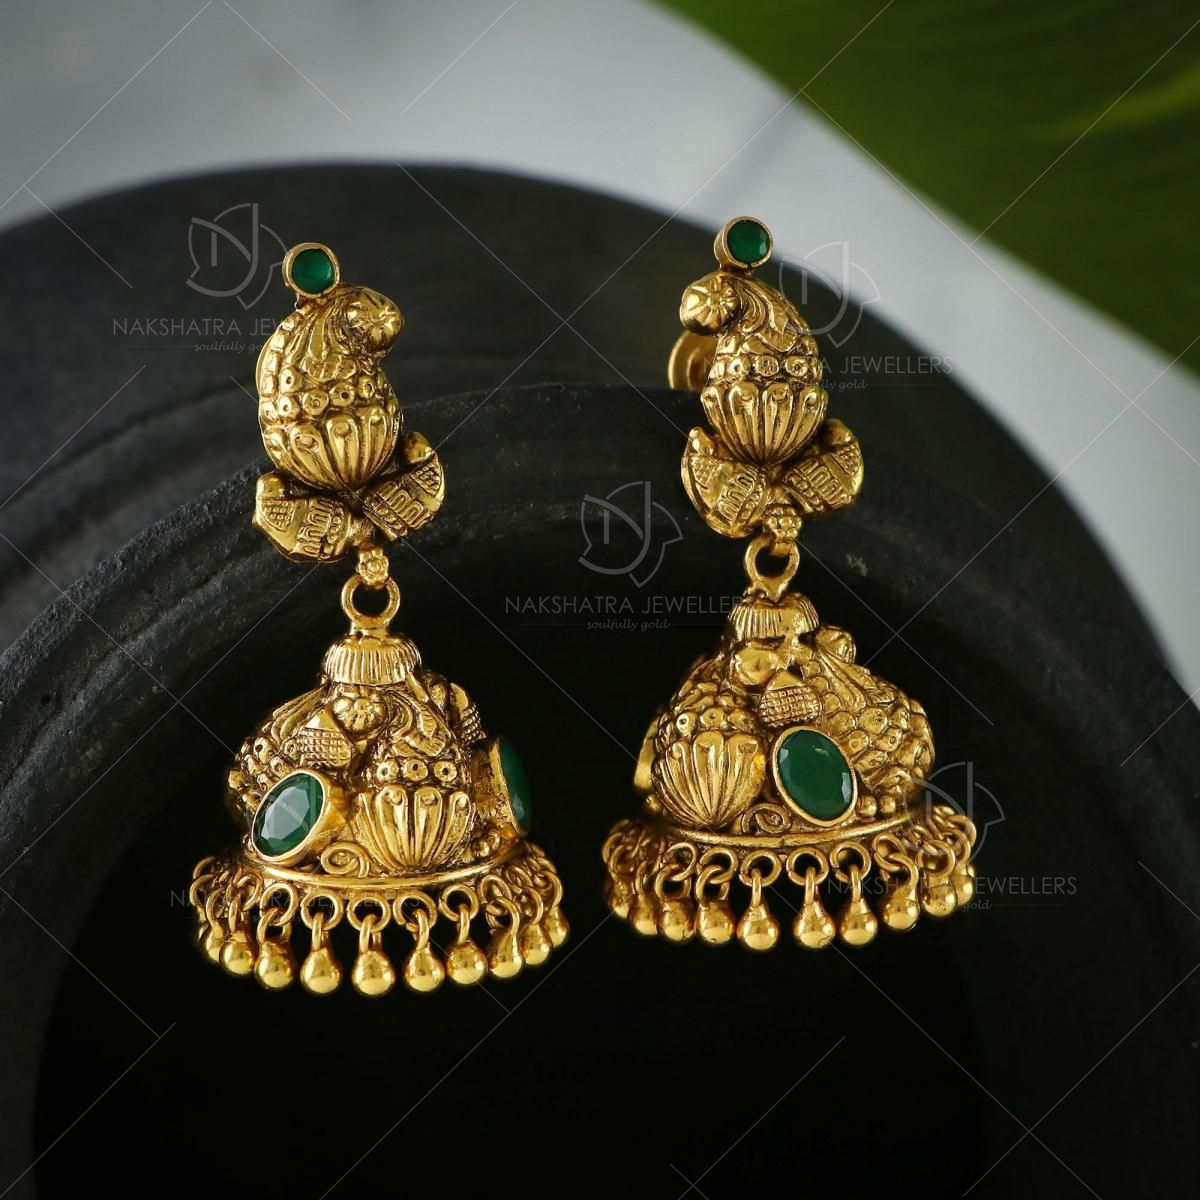 Discover 132+ png jewellers gold earrings designs